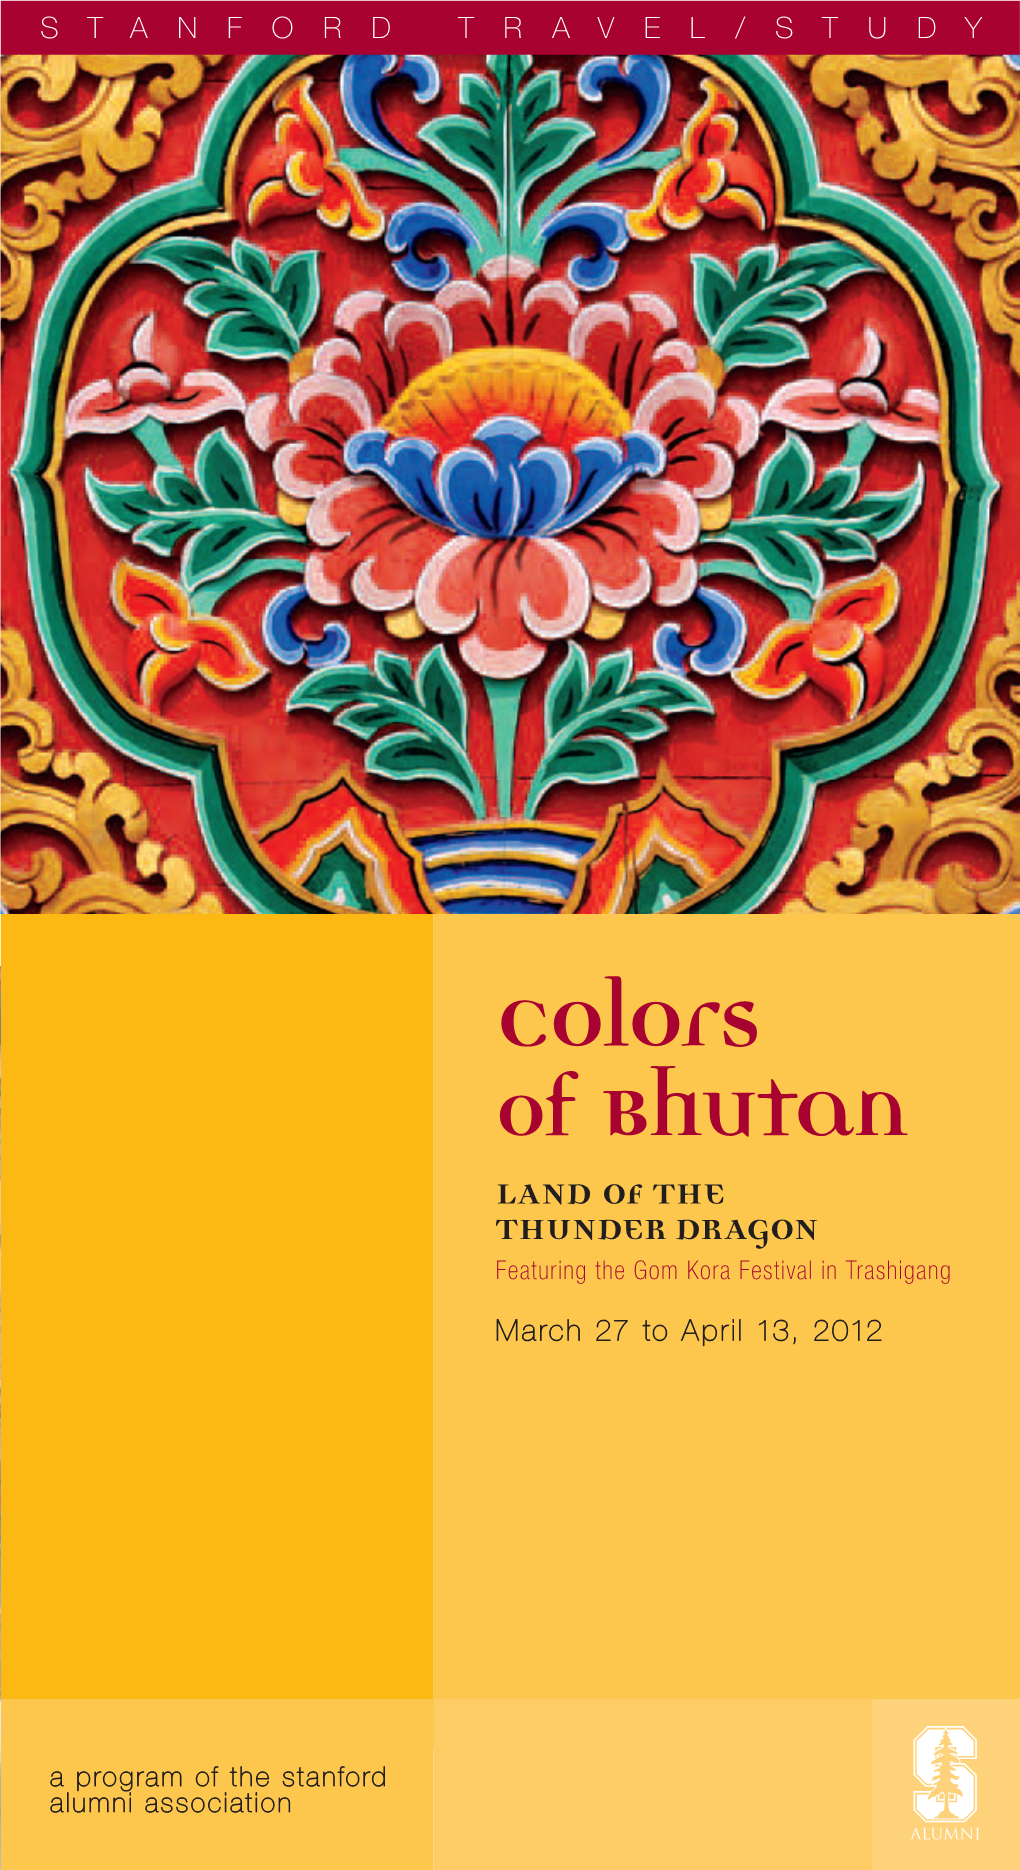 Colors of Bhutan Land of the Thunder Dragon Featuring the Gom Kora Festival in Trashigang